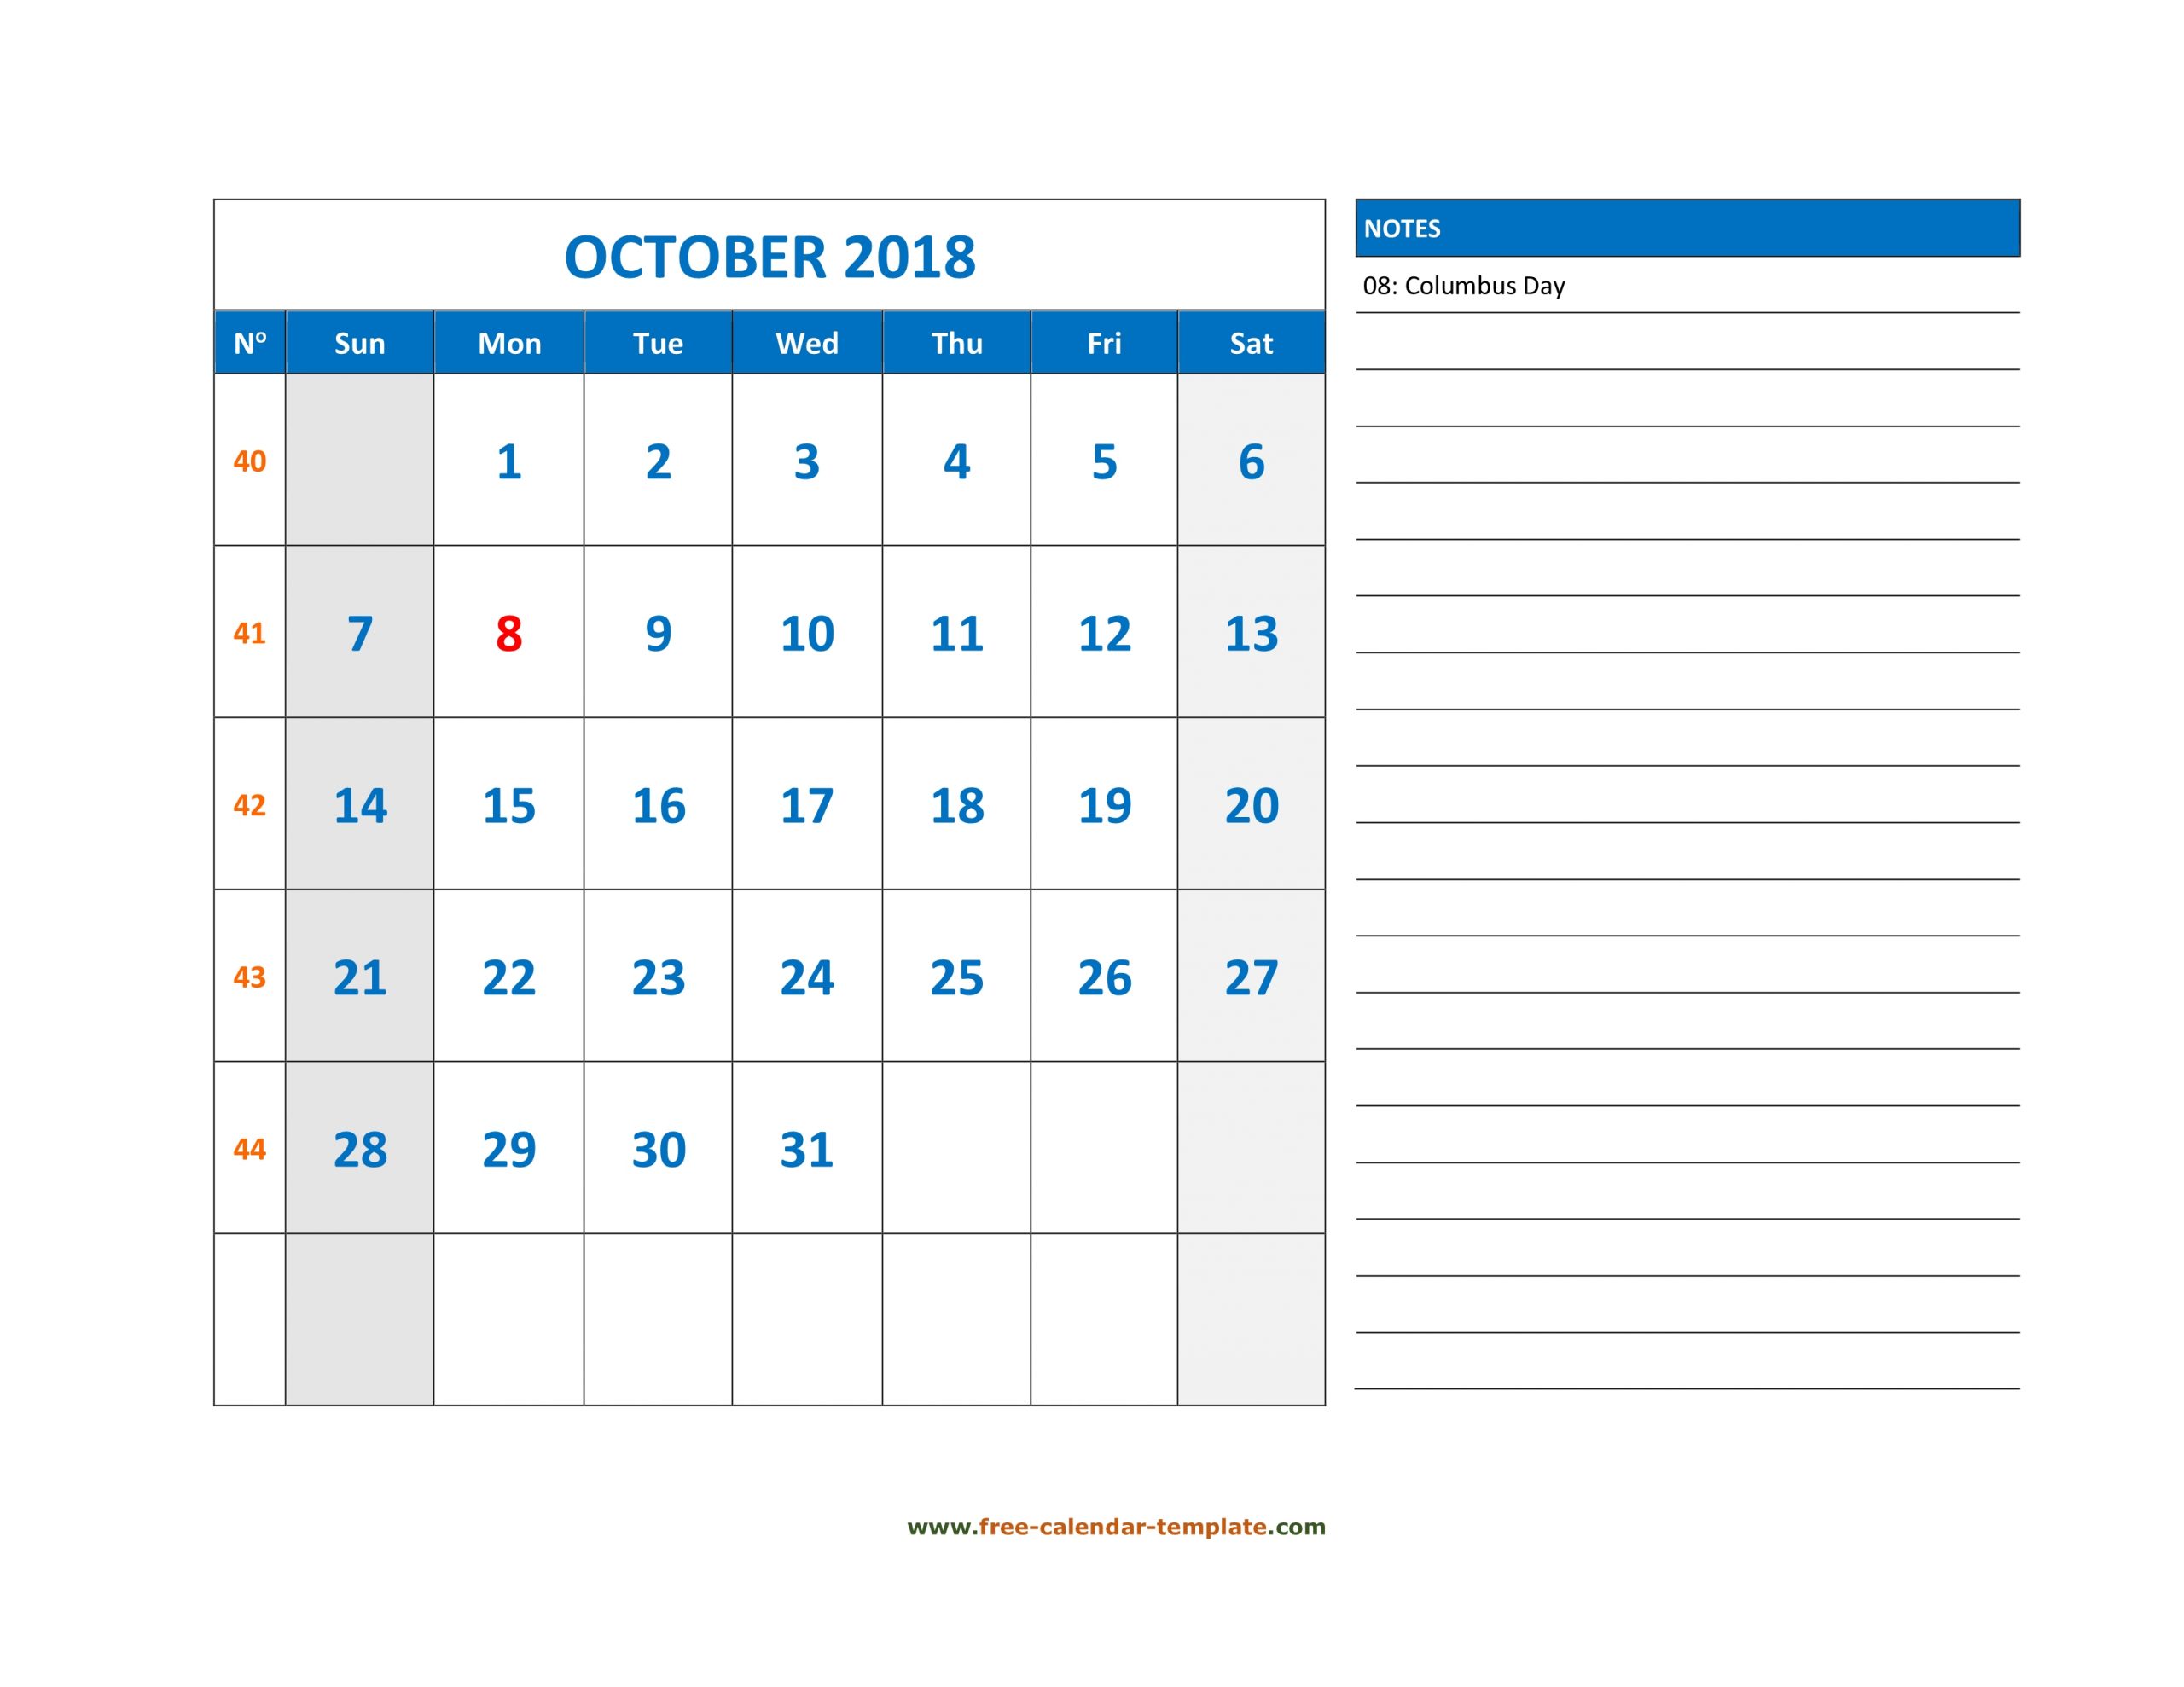 October Calendar 2018 Grid Lines For Holidays And Notes